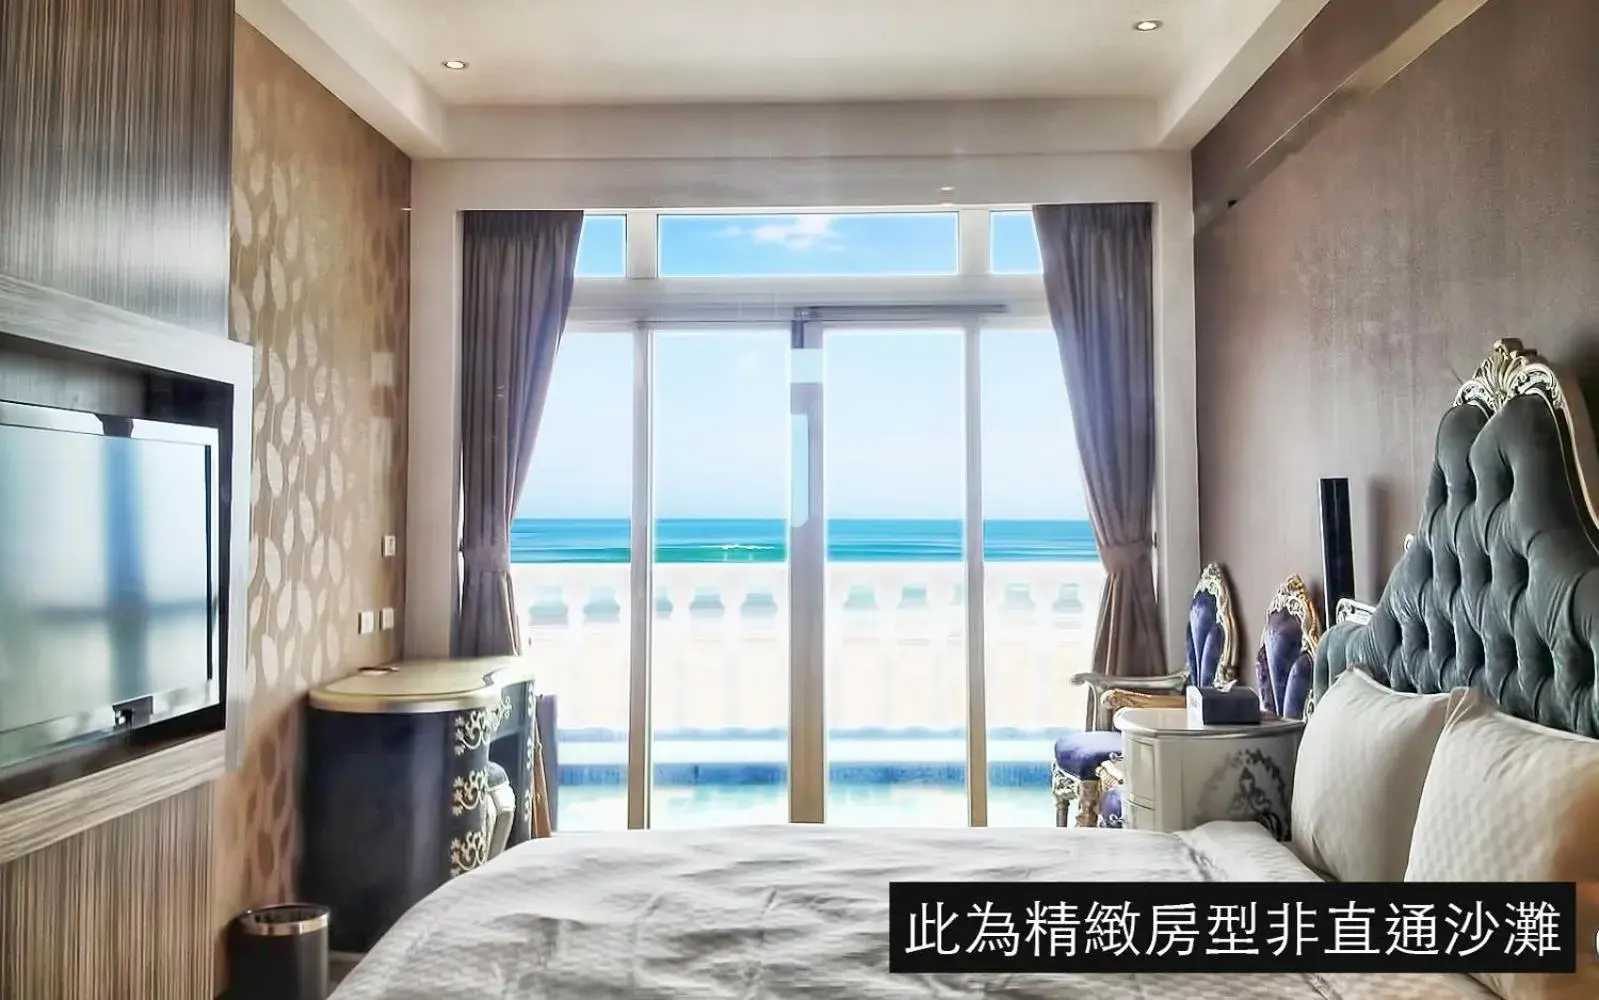 Sea View in White House Hot Spring Beach Resort